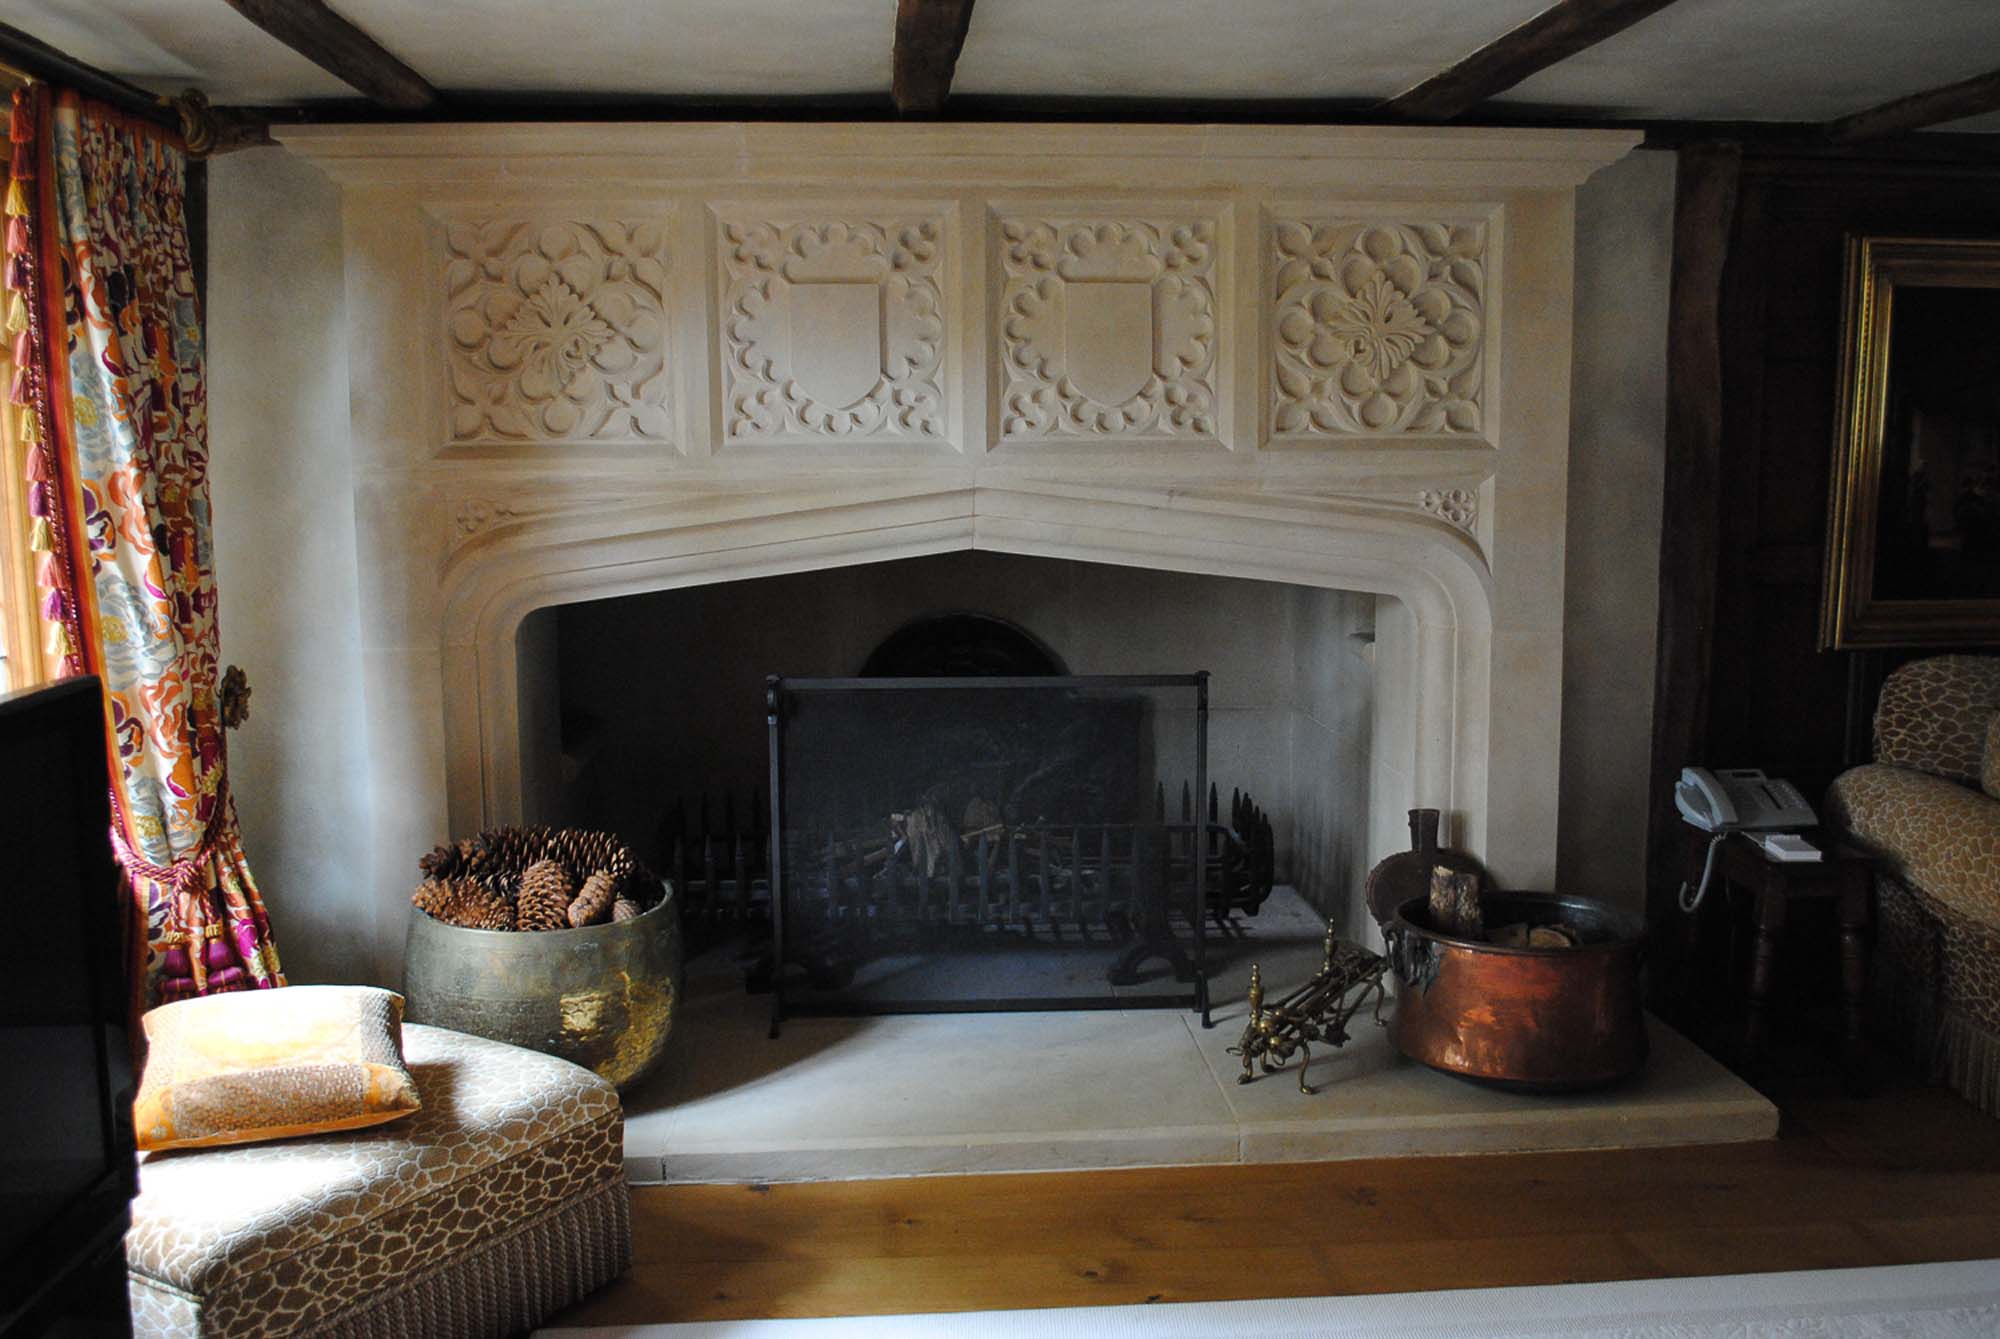 Portland stone fireplace with hand carved Gothic style quatrefoils and shields